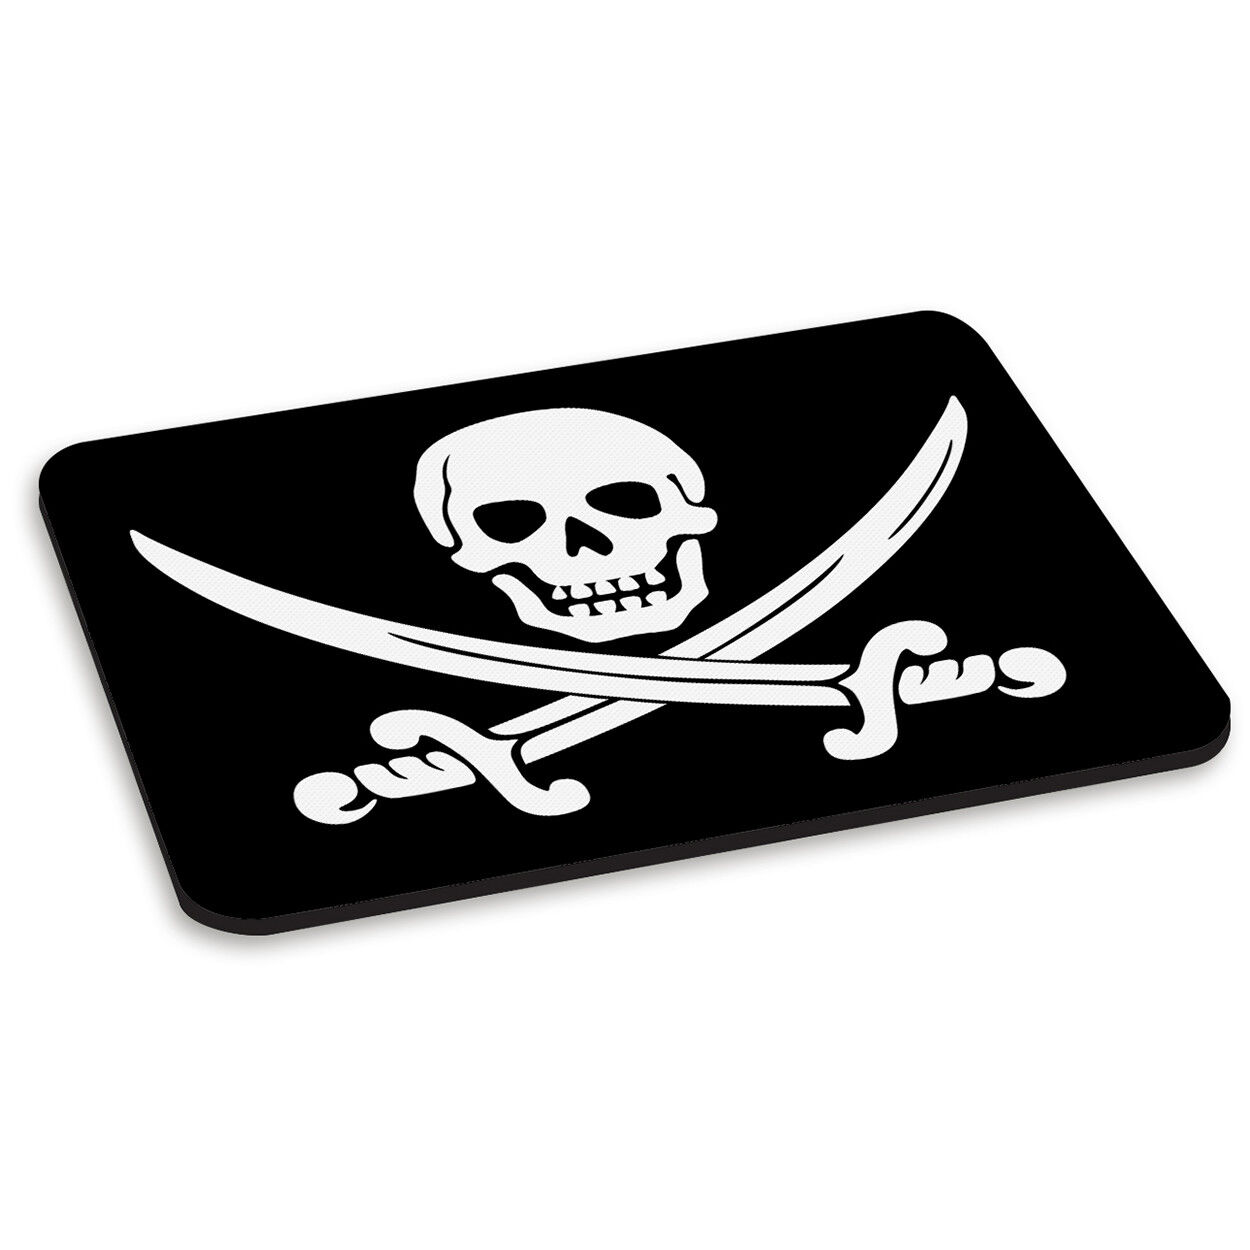 PIRATE SKULL AND CROSSBONES PC COMPUTER MOUSE MAT PAD - Jolly Roger Ship Flag